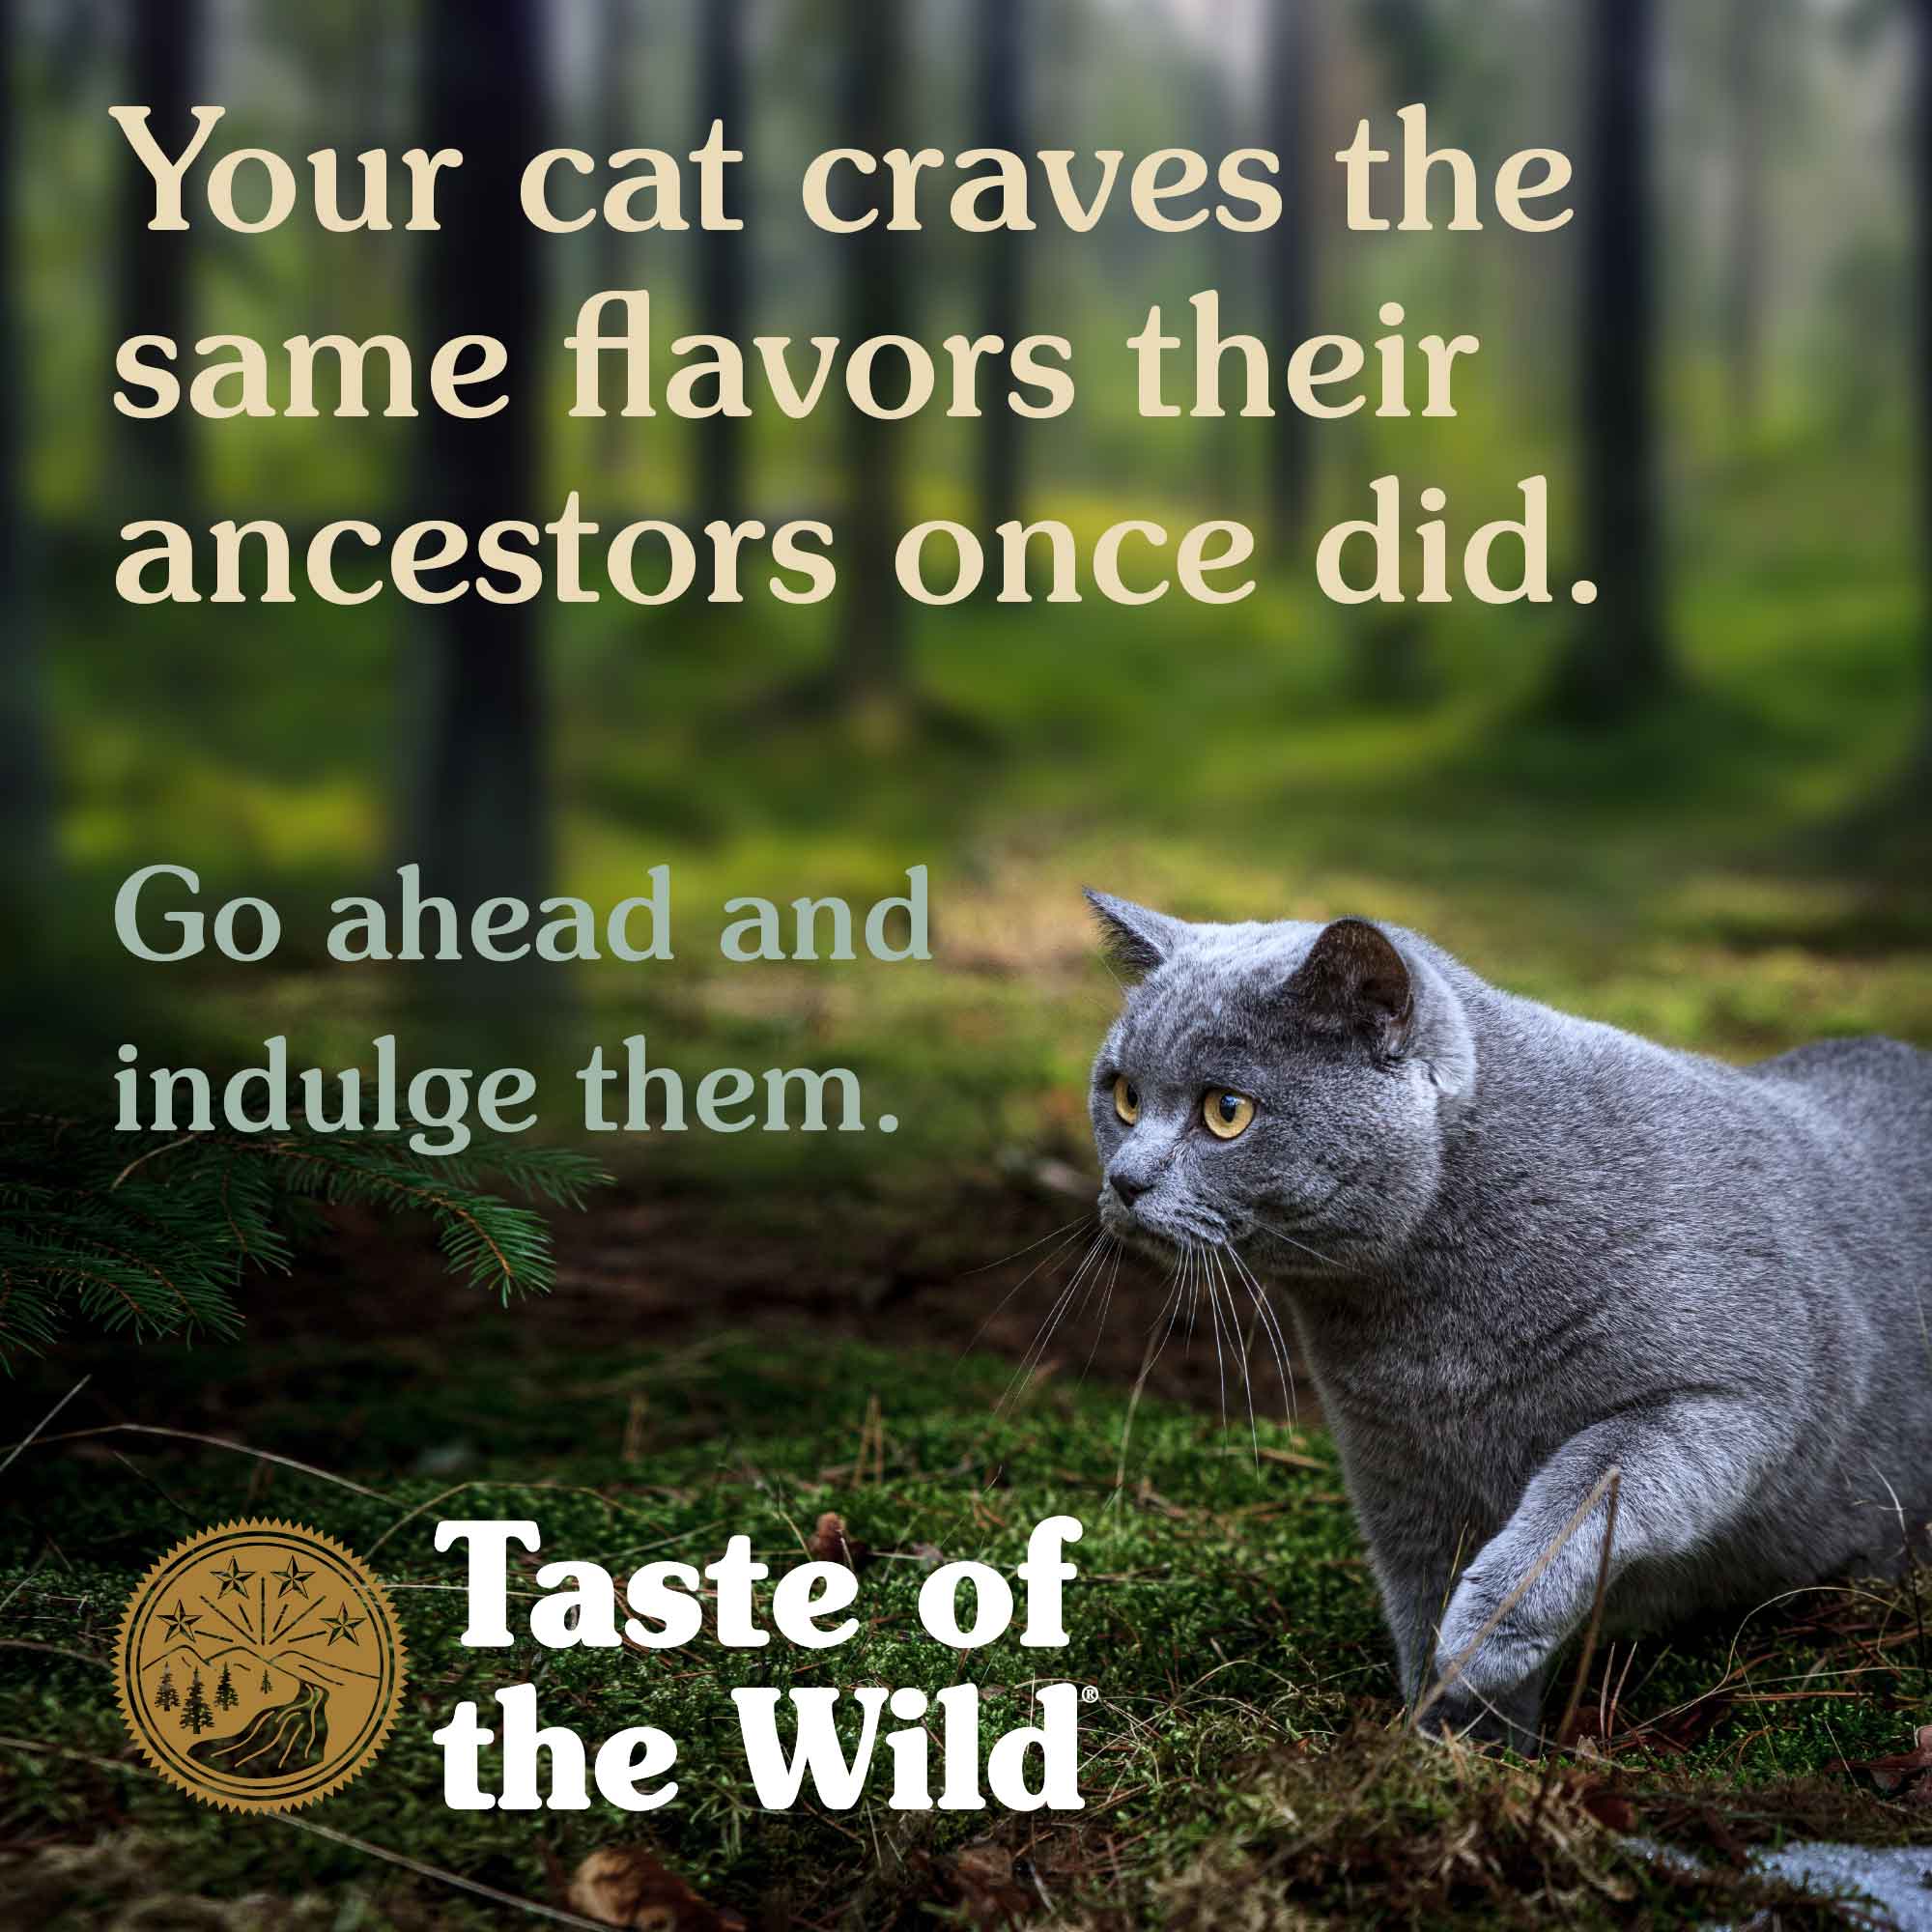 Your cat craves the same flavors their ancestors once did.